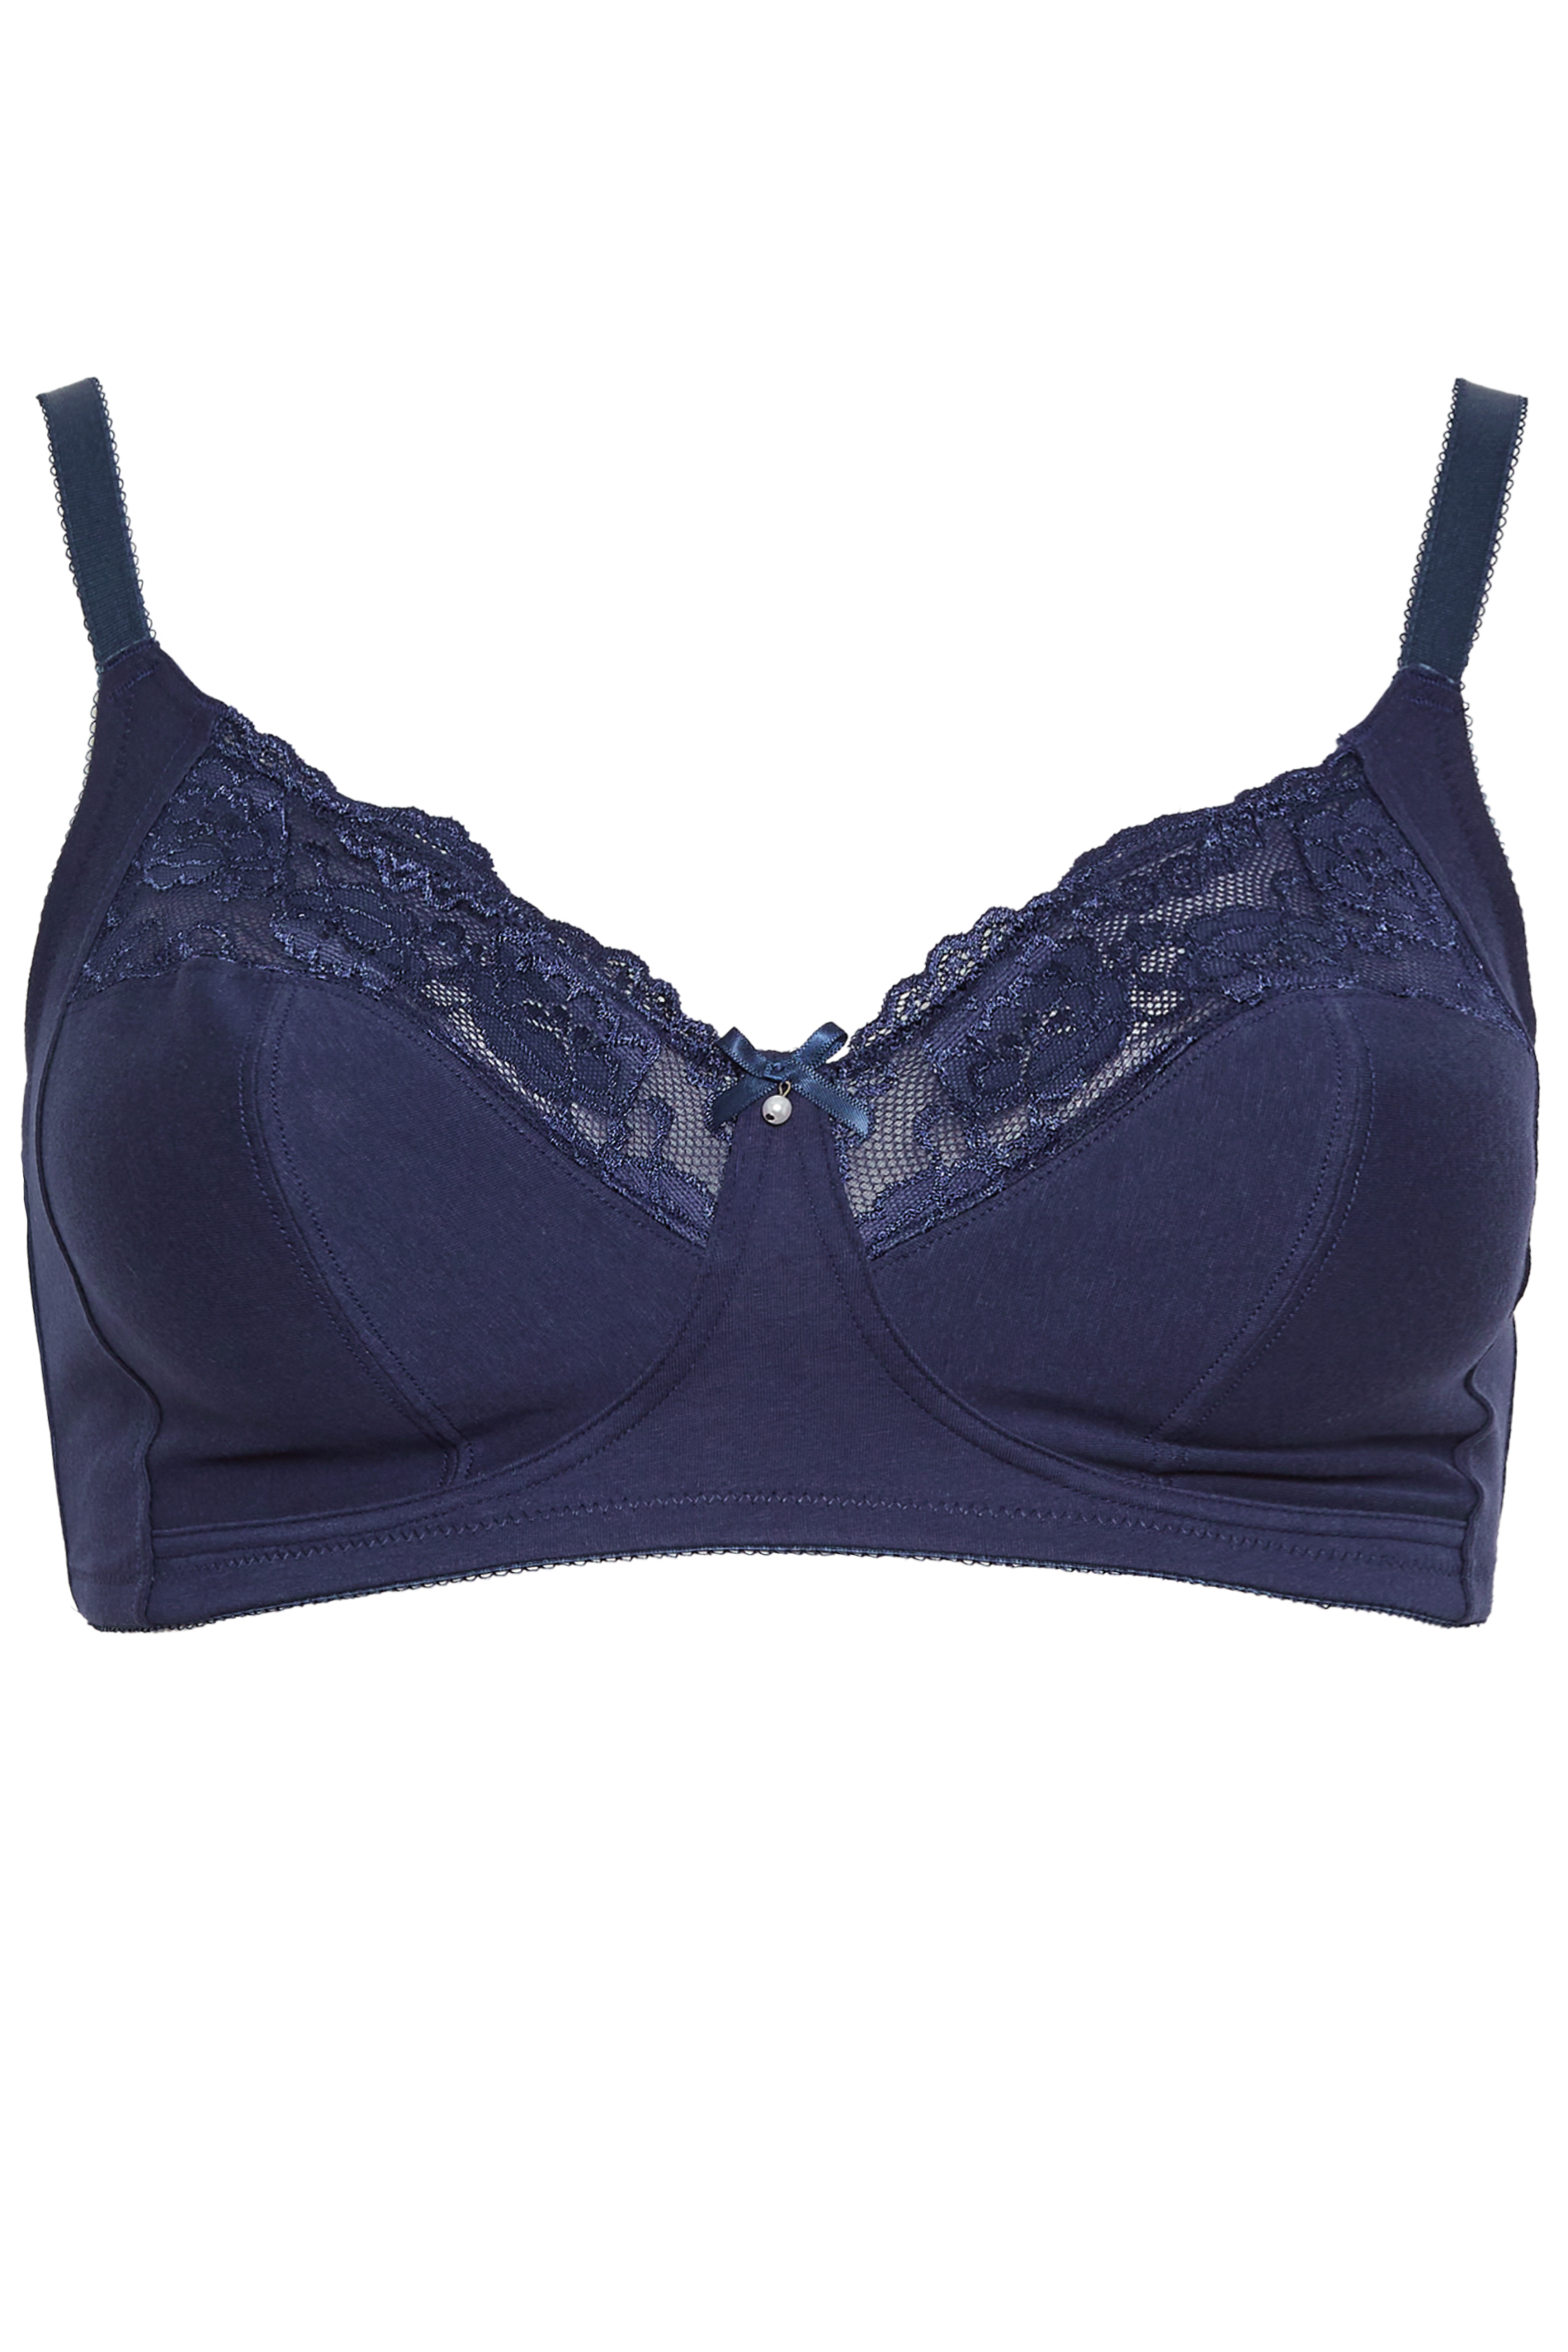 YOURS Plus Size Navy Blue Cotton Lace Trim Non-Wired Bra